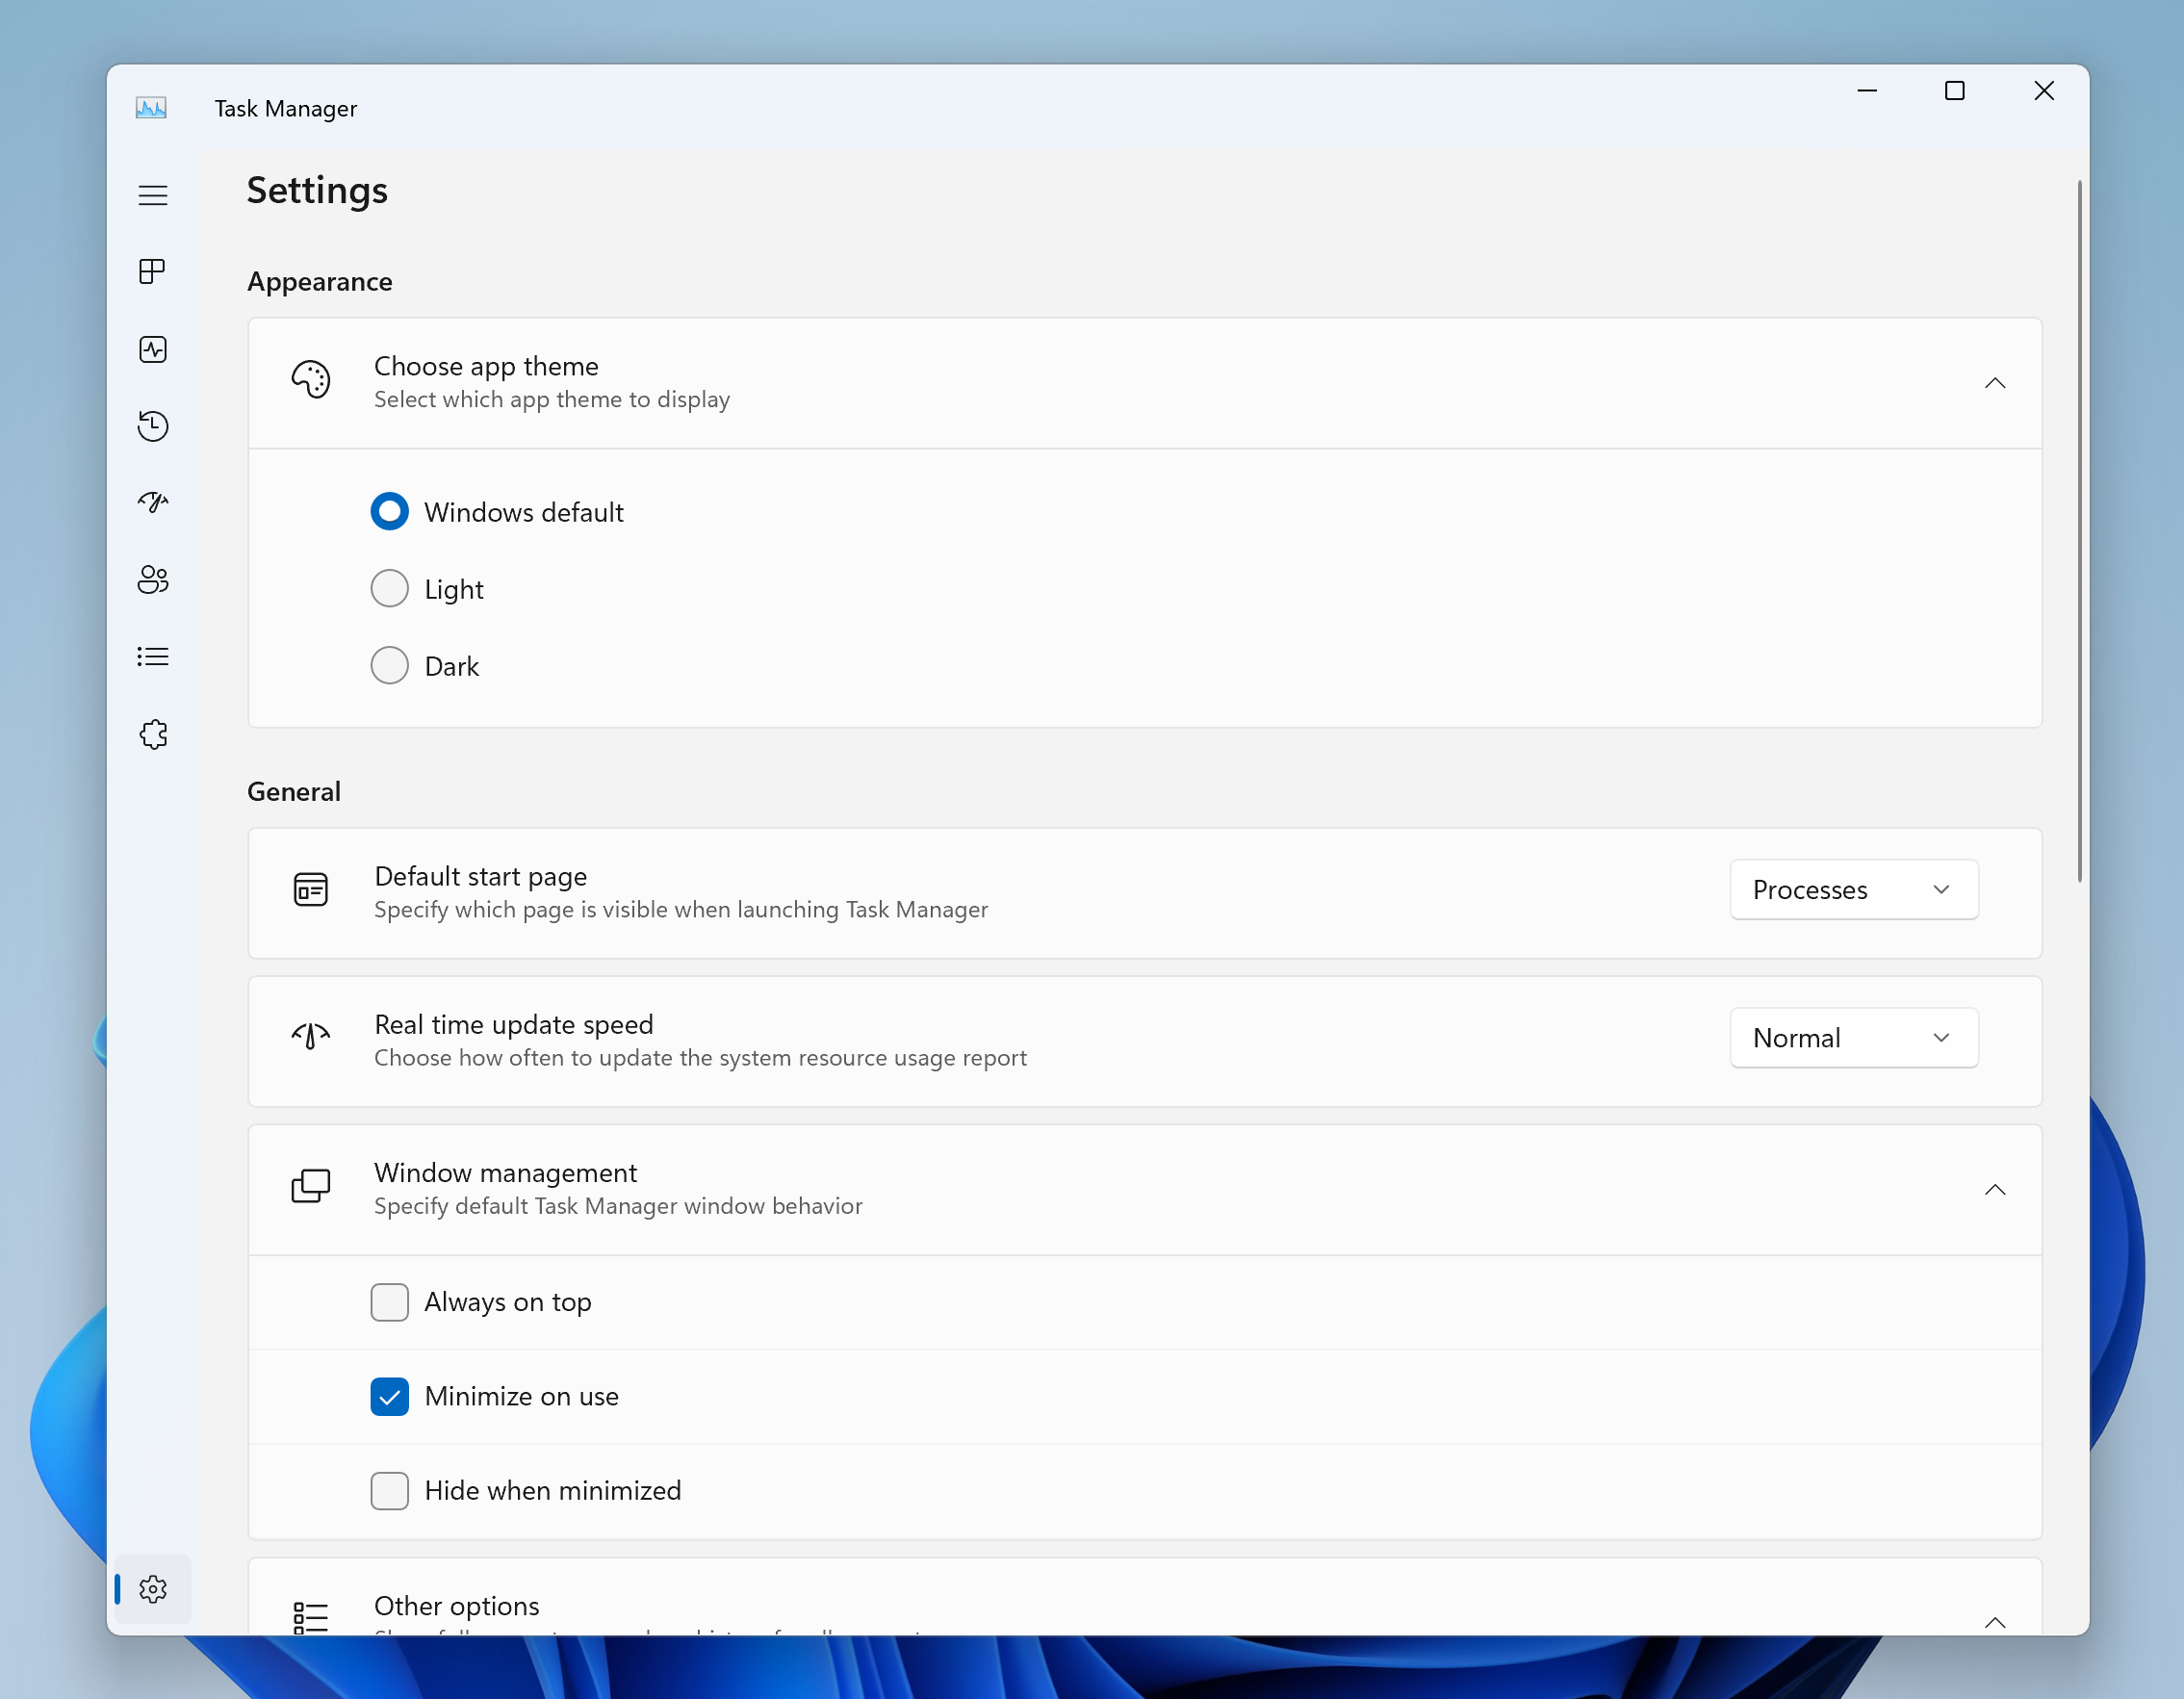 Redesigned Task Manager settings